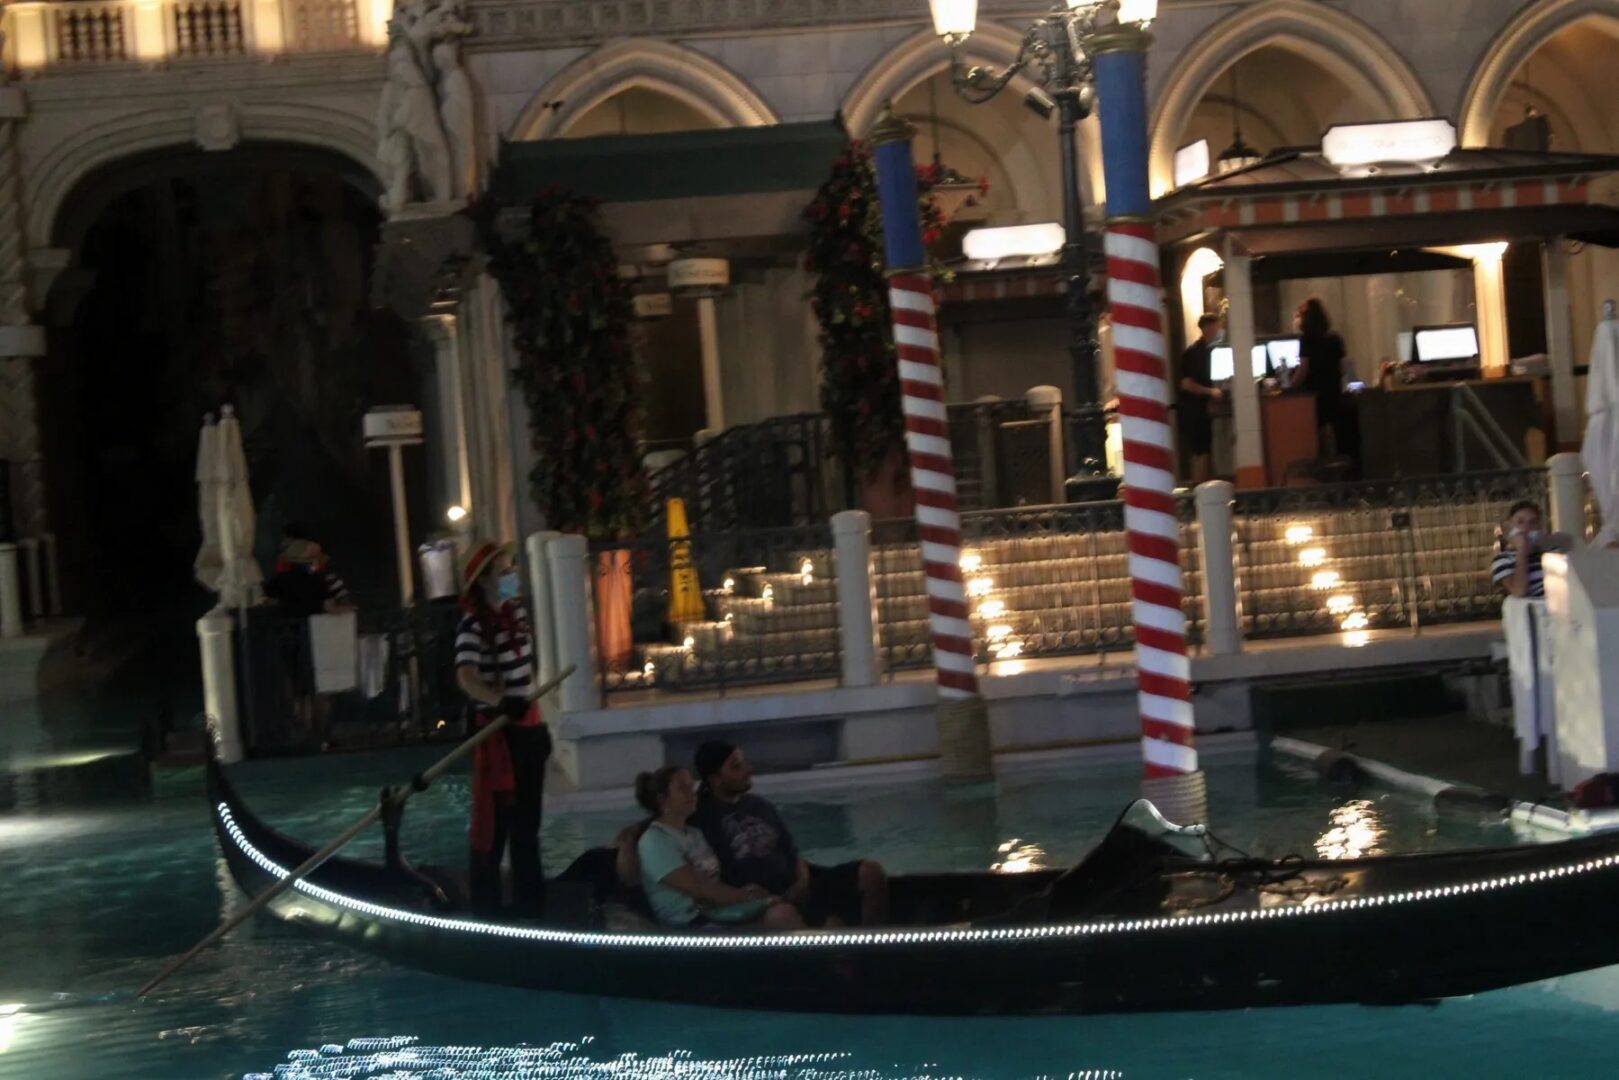 A gondola is in the water near some buildings.